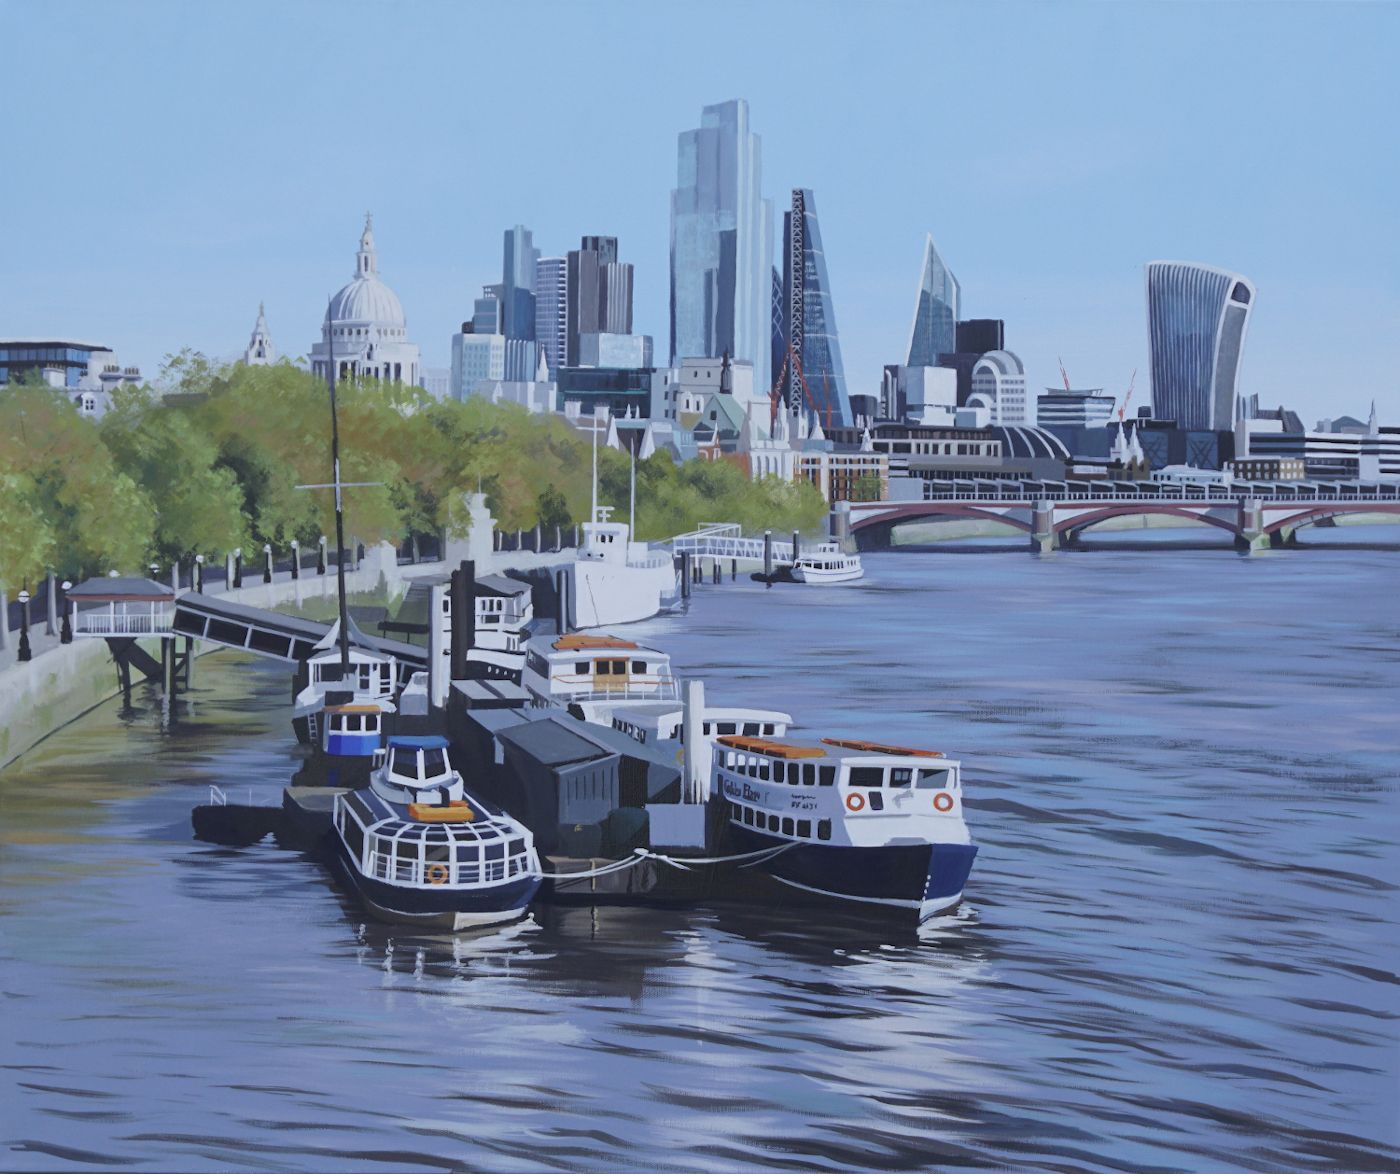 The City From Waterloo Bridge by Jo Quigley